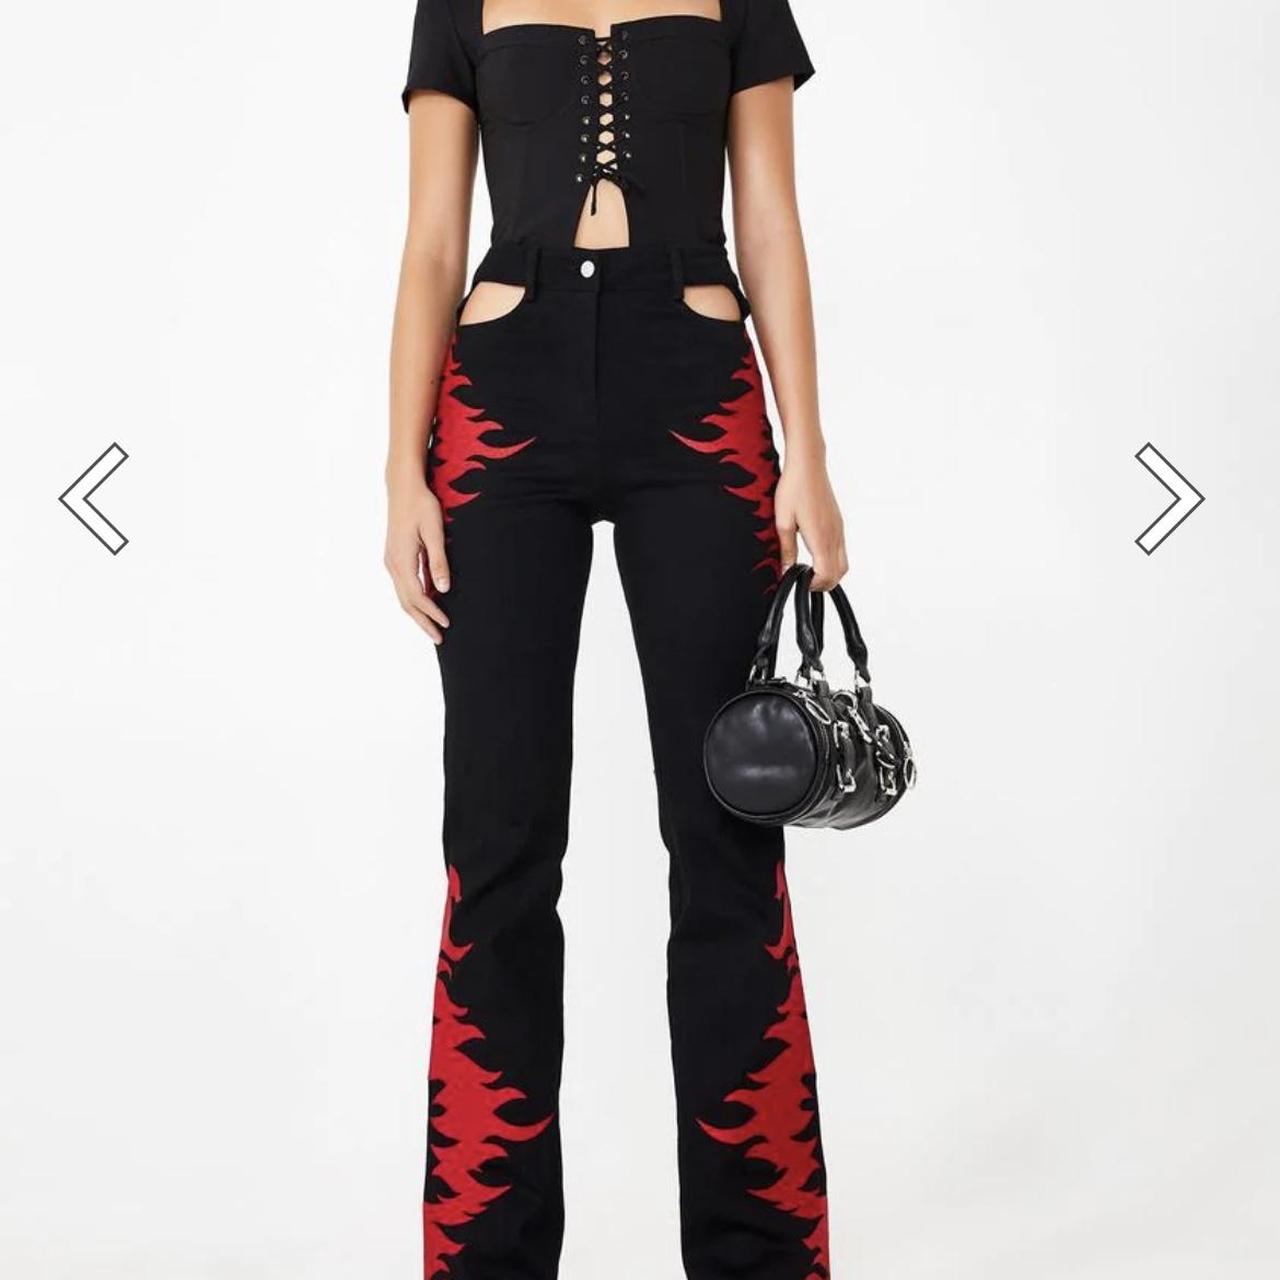 I.AM.GIA Flame Embroidered Pants Black Red Stretch Flare Size XS | eBay